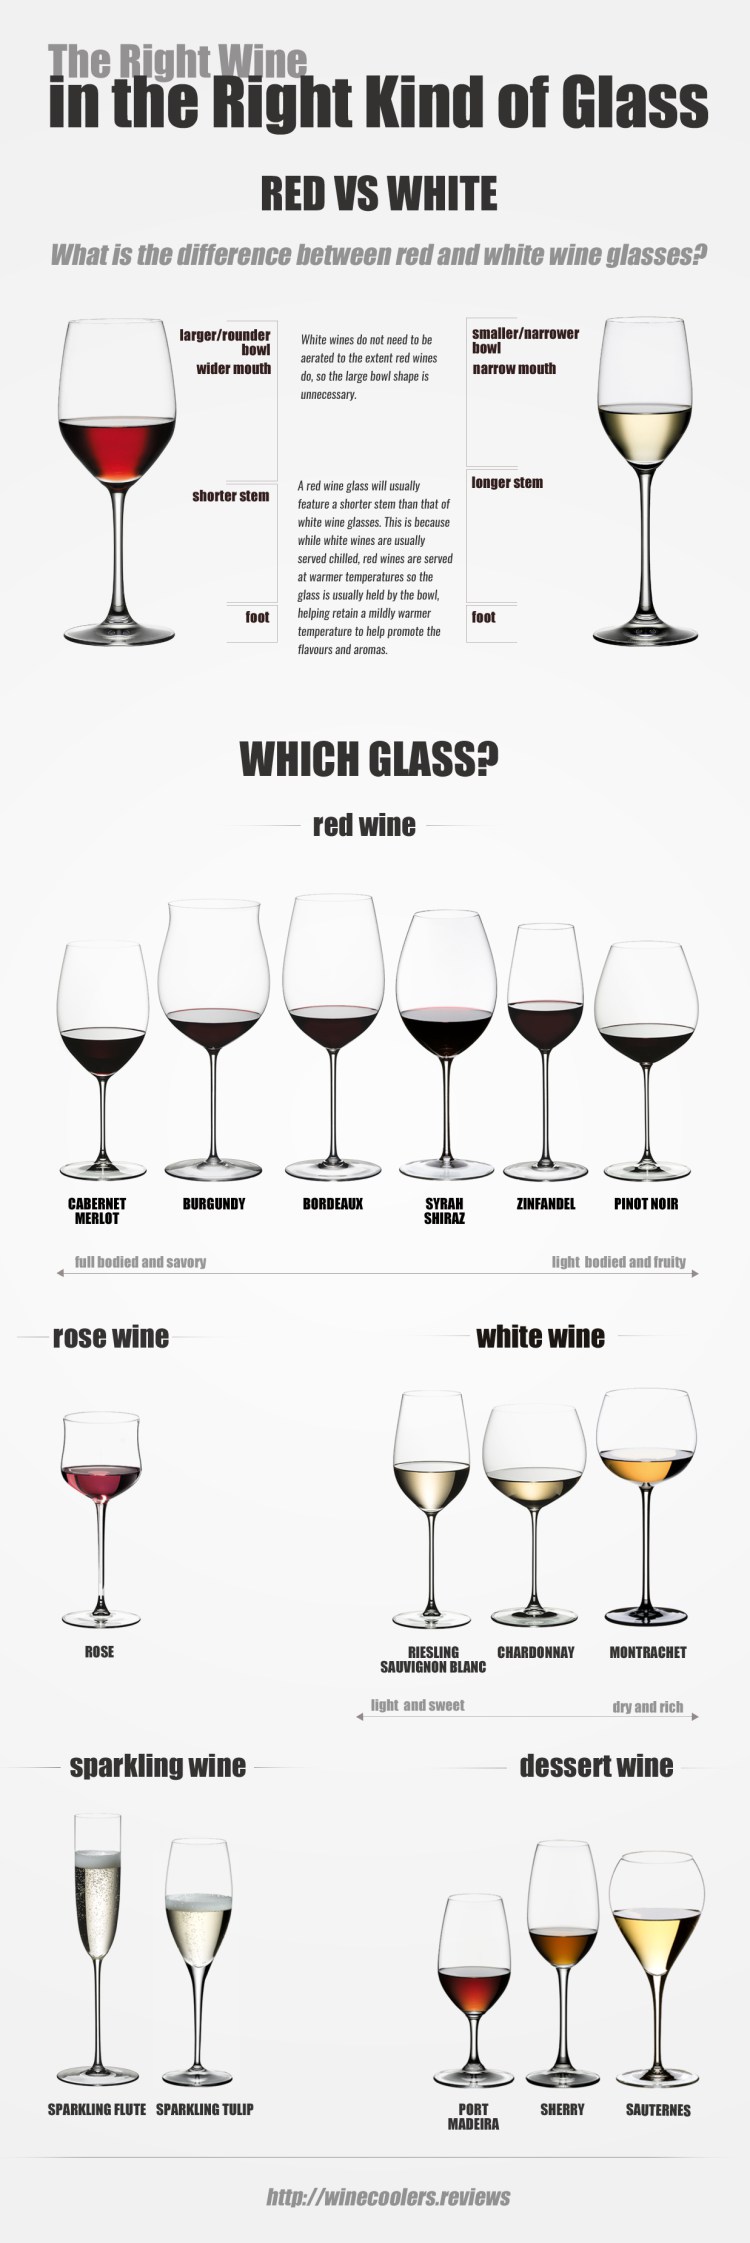 The Right Wine in the Right Kind of Glass infographic